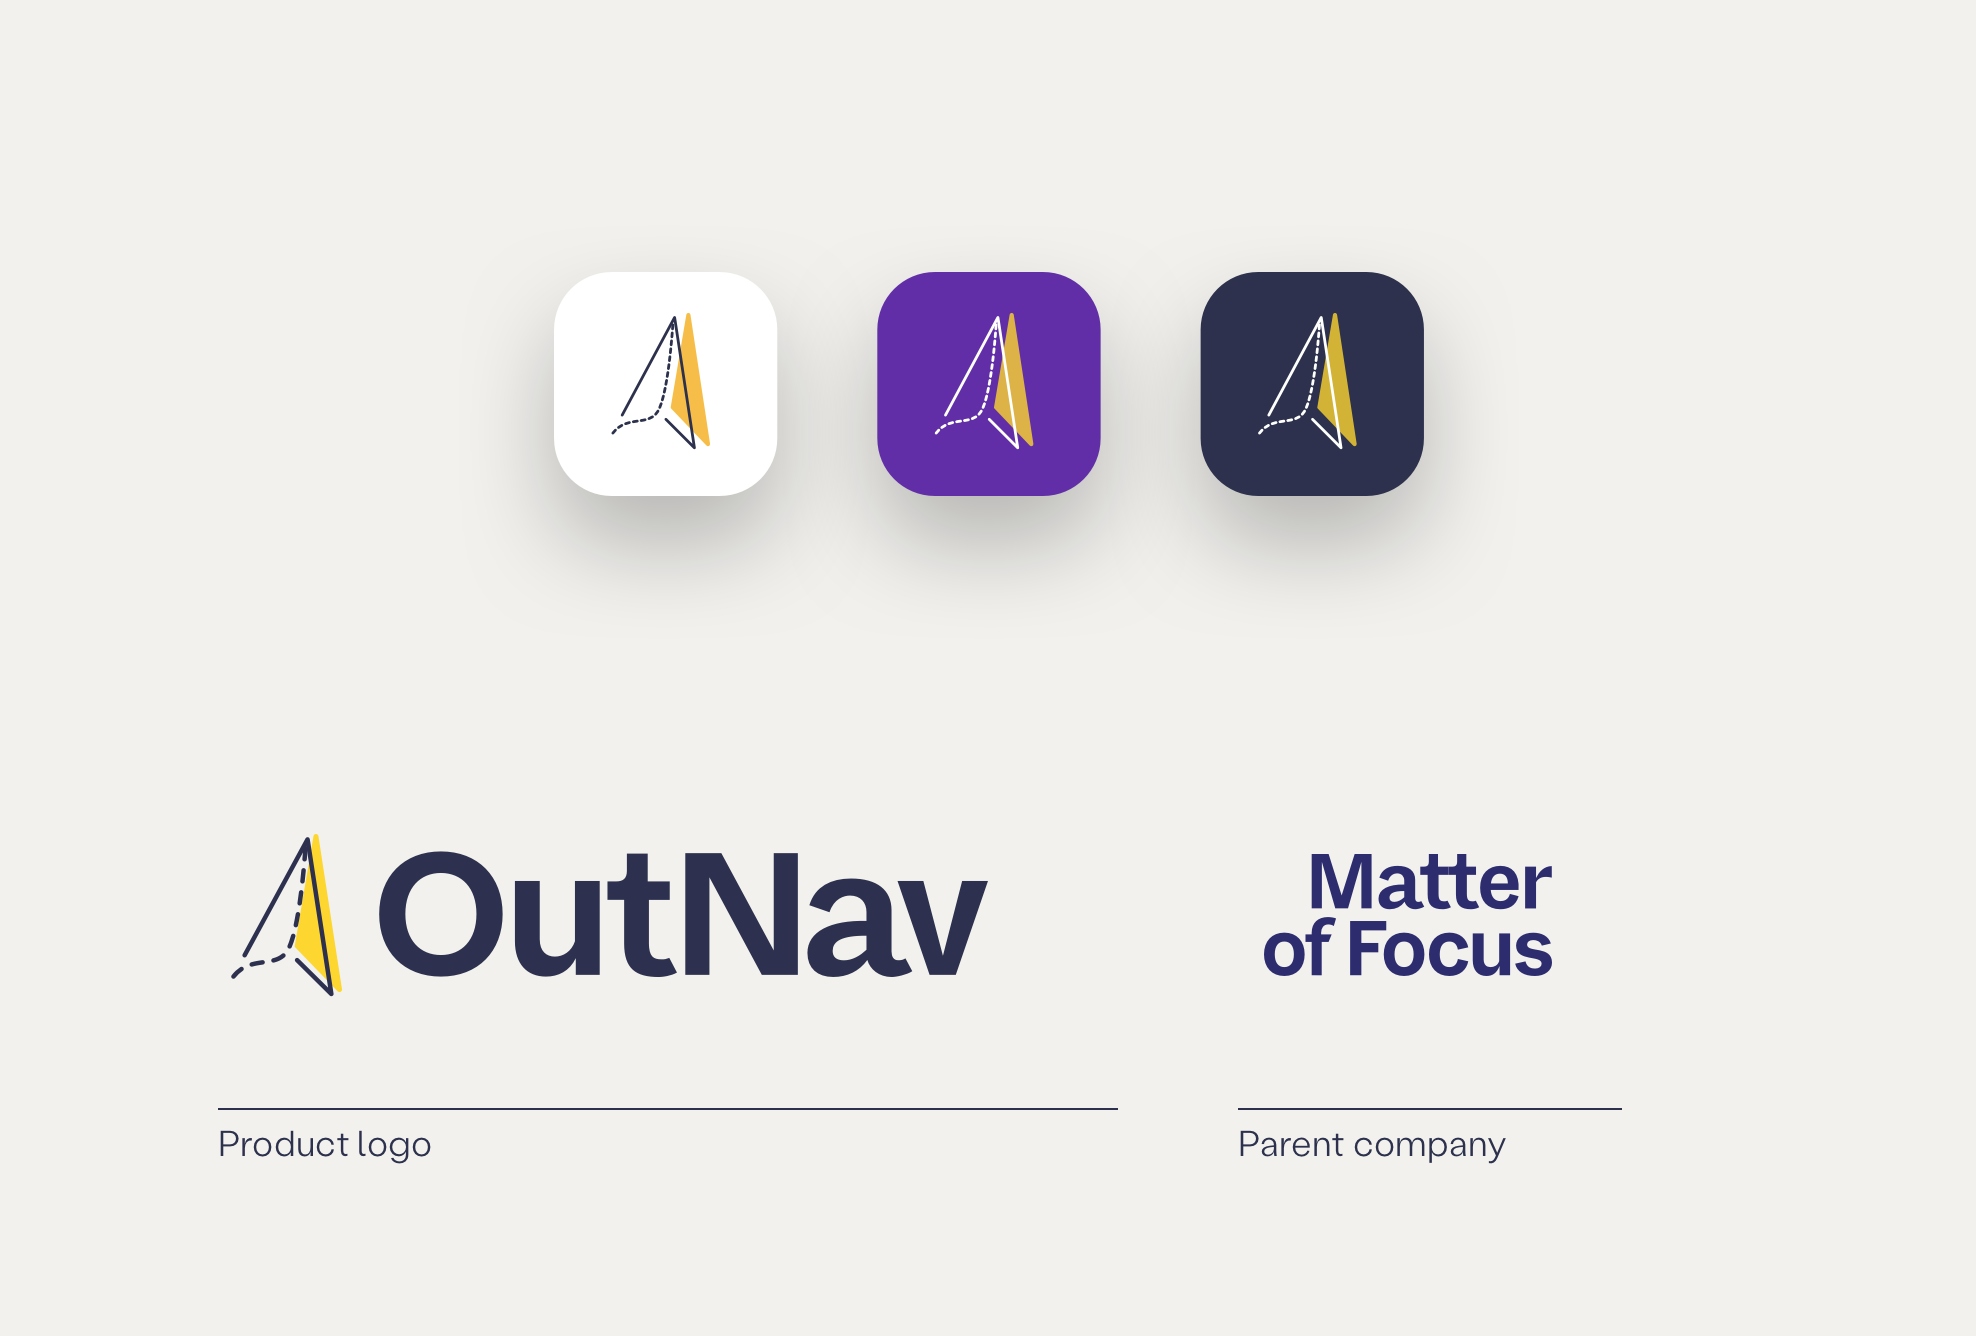 An offwhite image with three paper planes in individual square buttons in white, purple and navy sitting in the middle of the top third of the picture. At the bottom left is a paper plane with the “OutNav” logo. A small separator bisects this and a smaller “Product logo”. To the right of this is the “Matter of Focus” across two lines. A small separator bisects this and a smaller “Parent company”